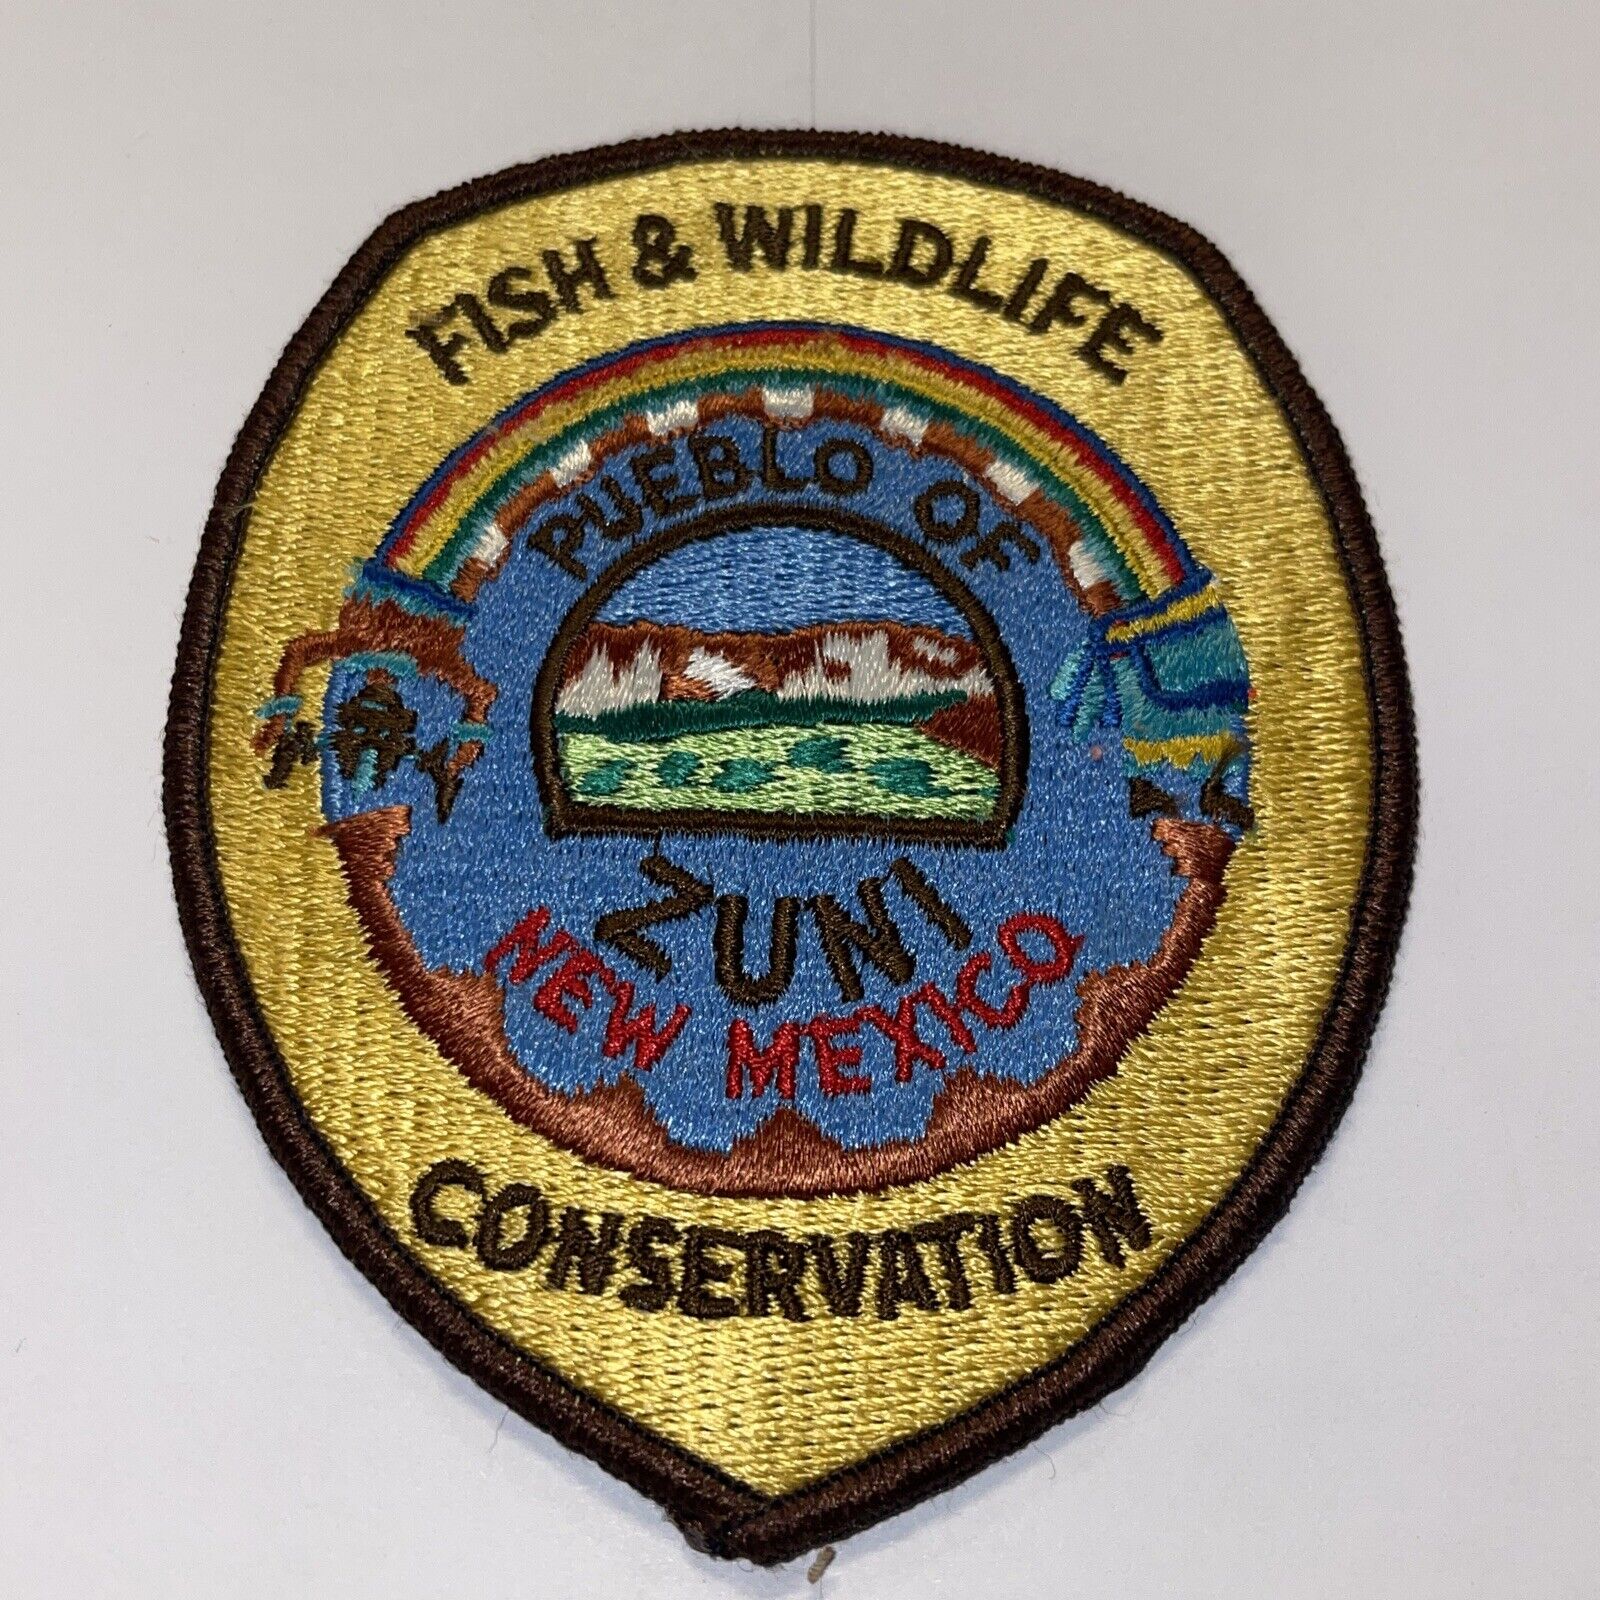 ZUNI NEW MEXICO CONSERVATION FISH & WILDLIFE PATCH TRIBE TRIBAL OBSOLETE